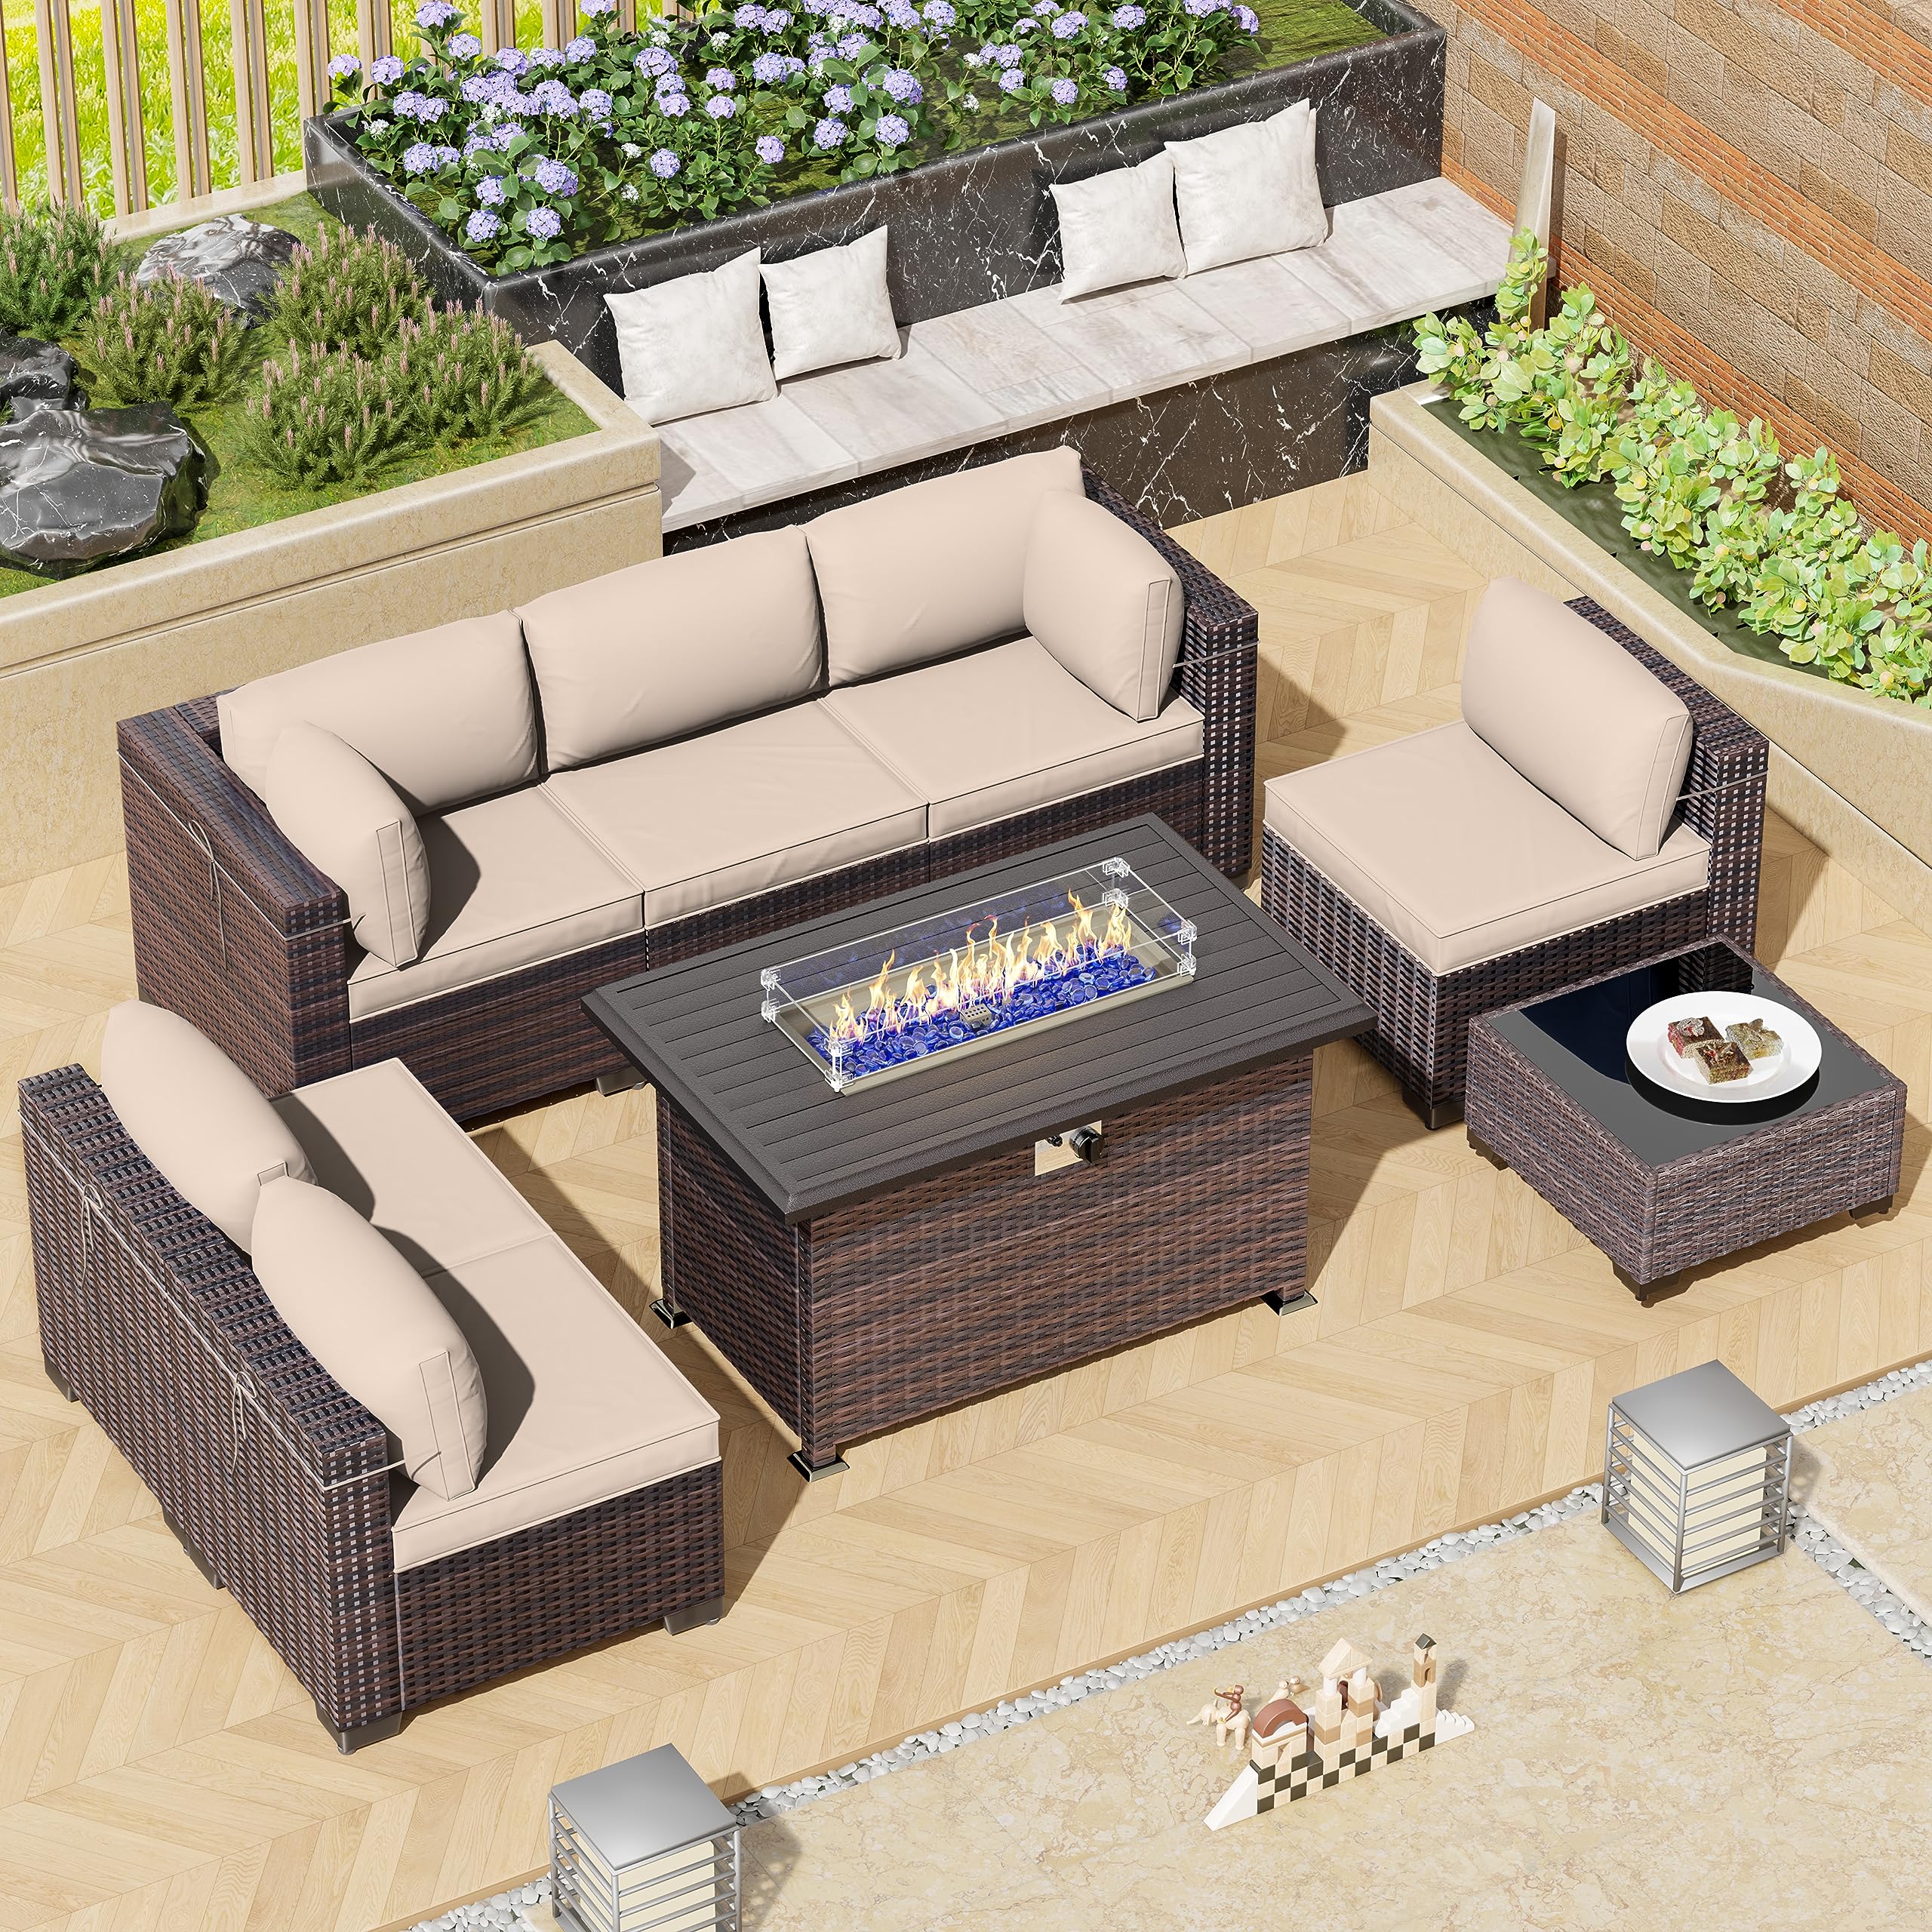 Outdoor Patio Furniture Set with Propane Fire Pit Table, 8 Pieces Outdoor Furniture